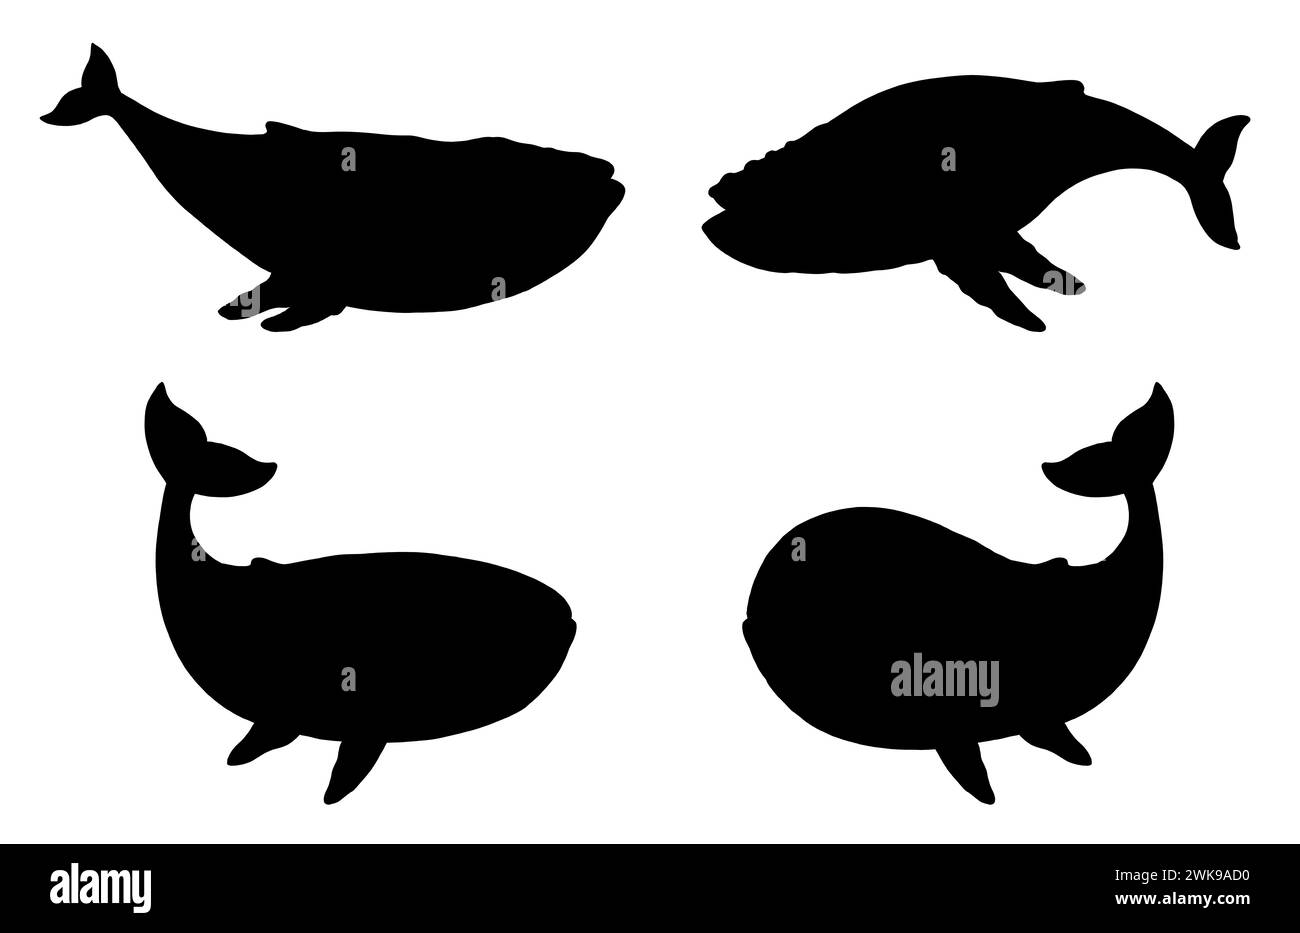 Set of whales black silhouettes. Template with funny animals. Template for kids to cut out and stick on. Stock Photo